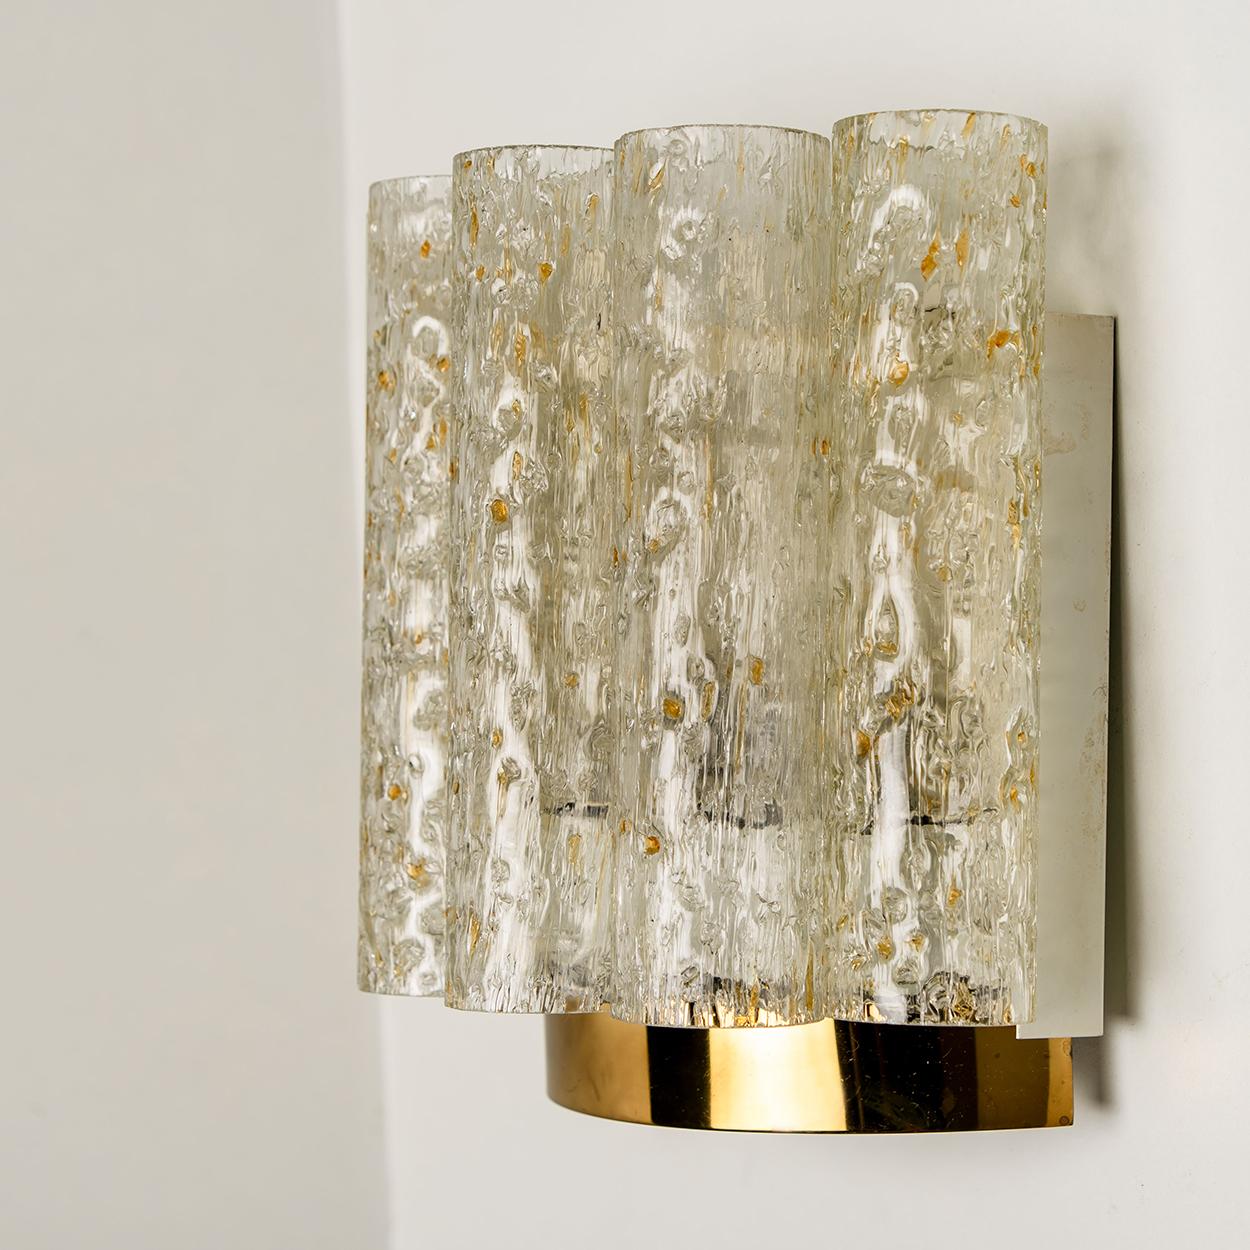 1 of the 6 Doria Wall Lamps in Brass and Glass, 1960s For Sale 1